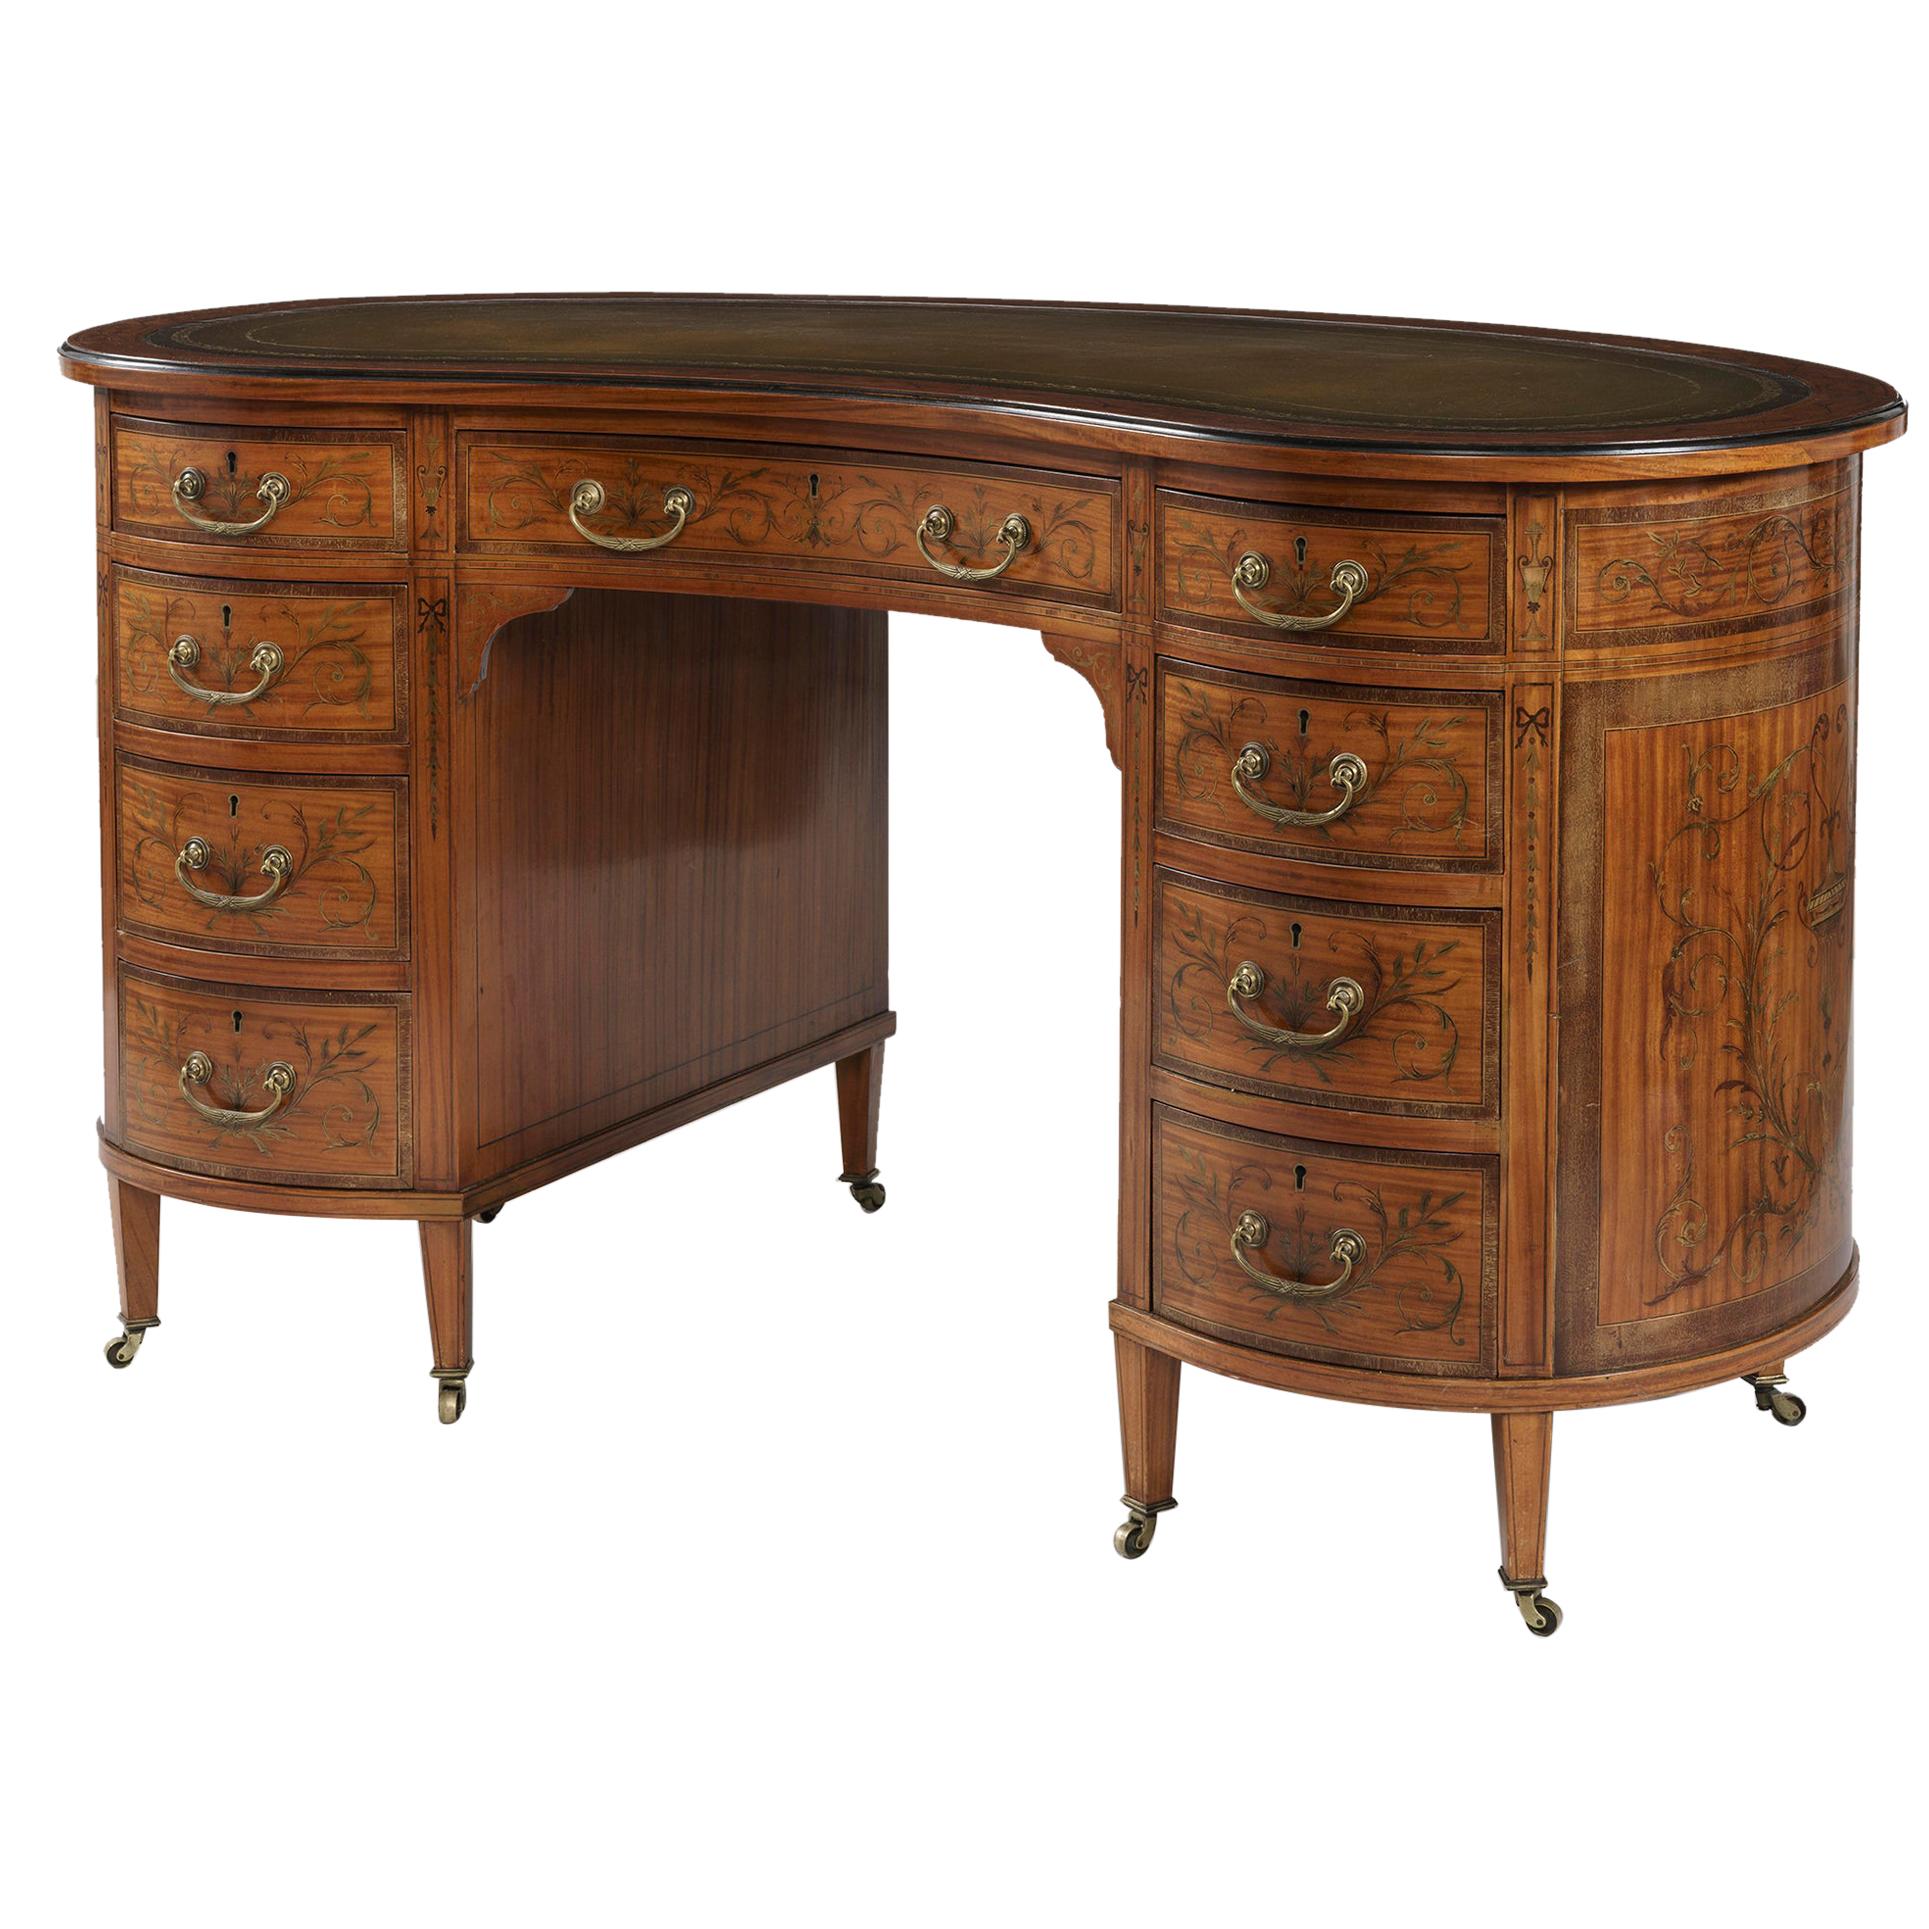 19th Century Satinwood and Marquetry Kidney-Shaped Writing Desk with Leather Top For Sale